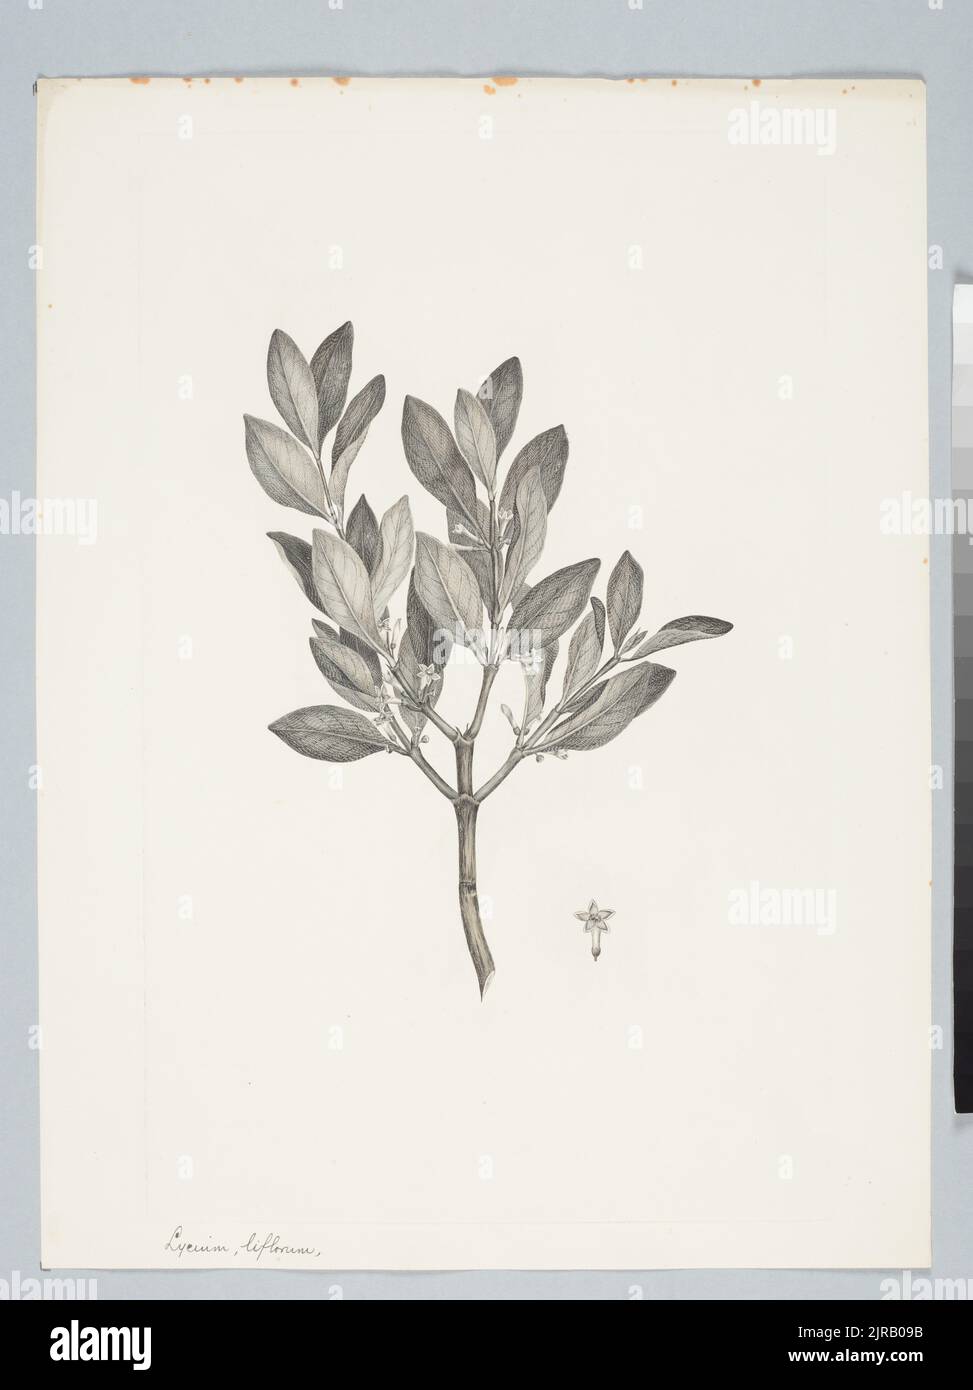 Canthium coprosmoides F. Mueller, by Sydney Parkinson. Gift of the British Museum, 1895. Stock Photo